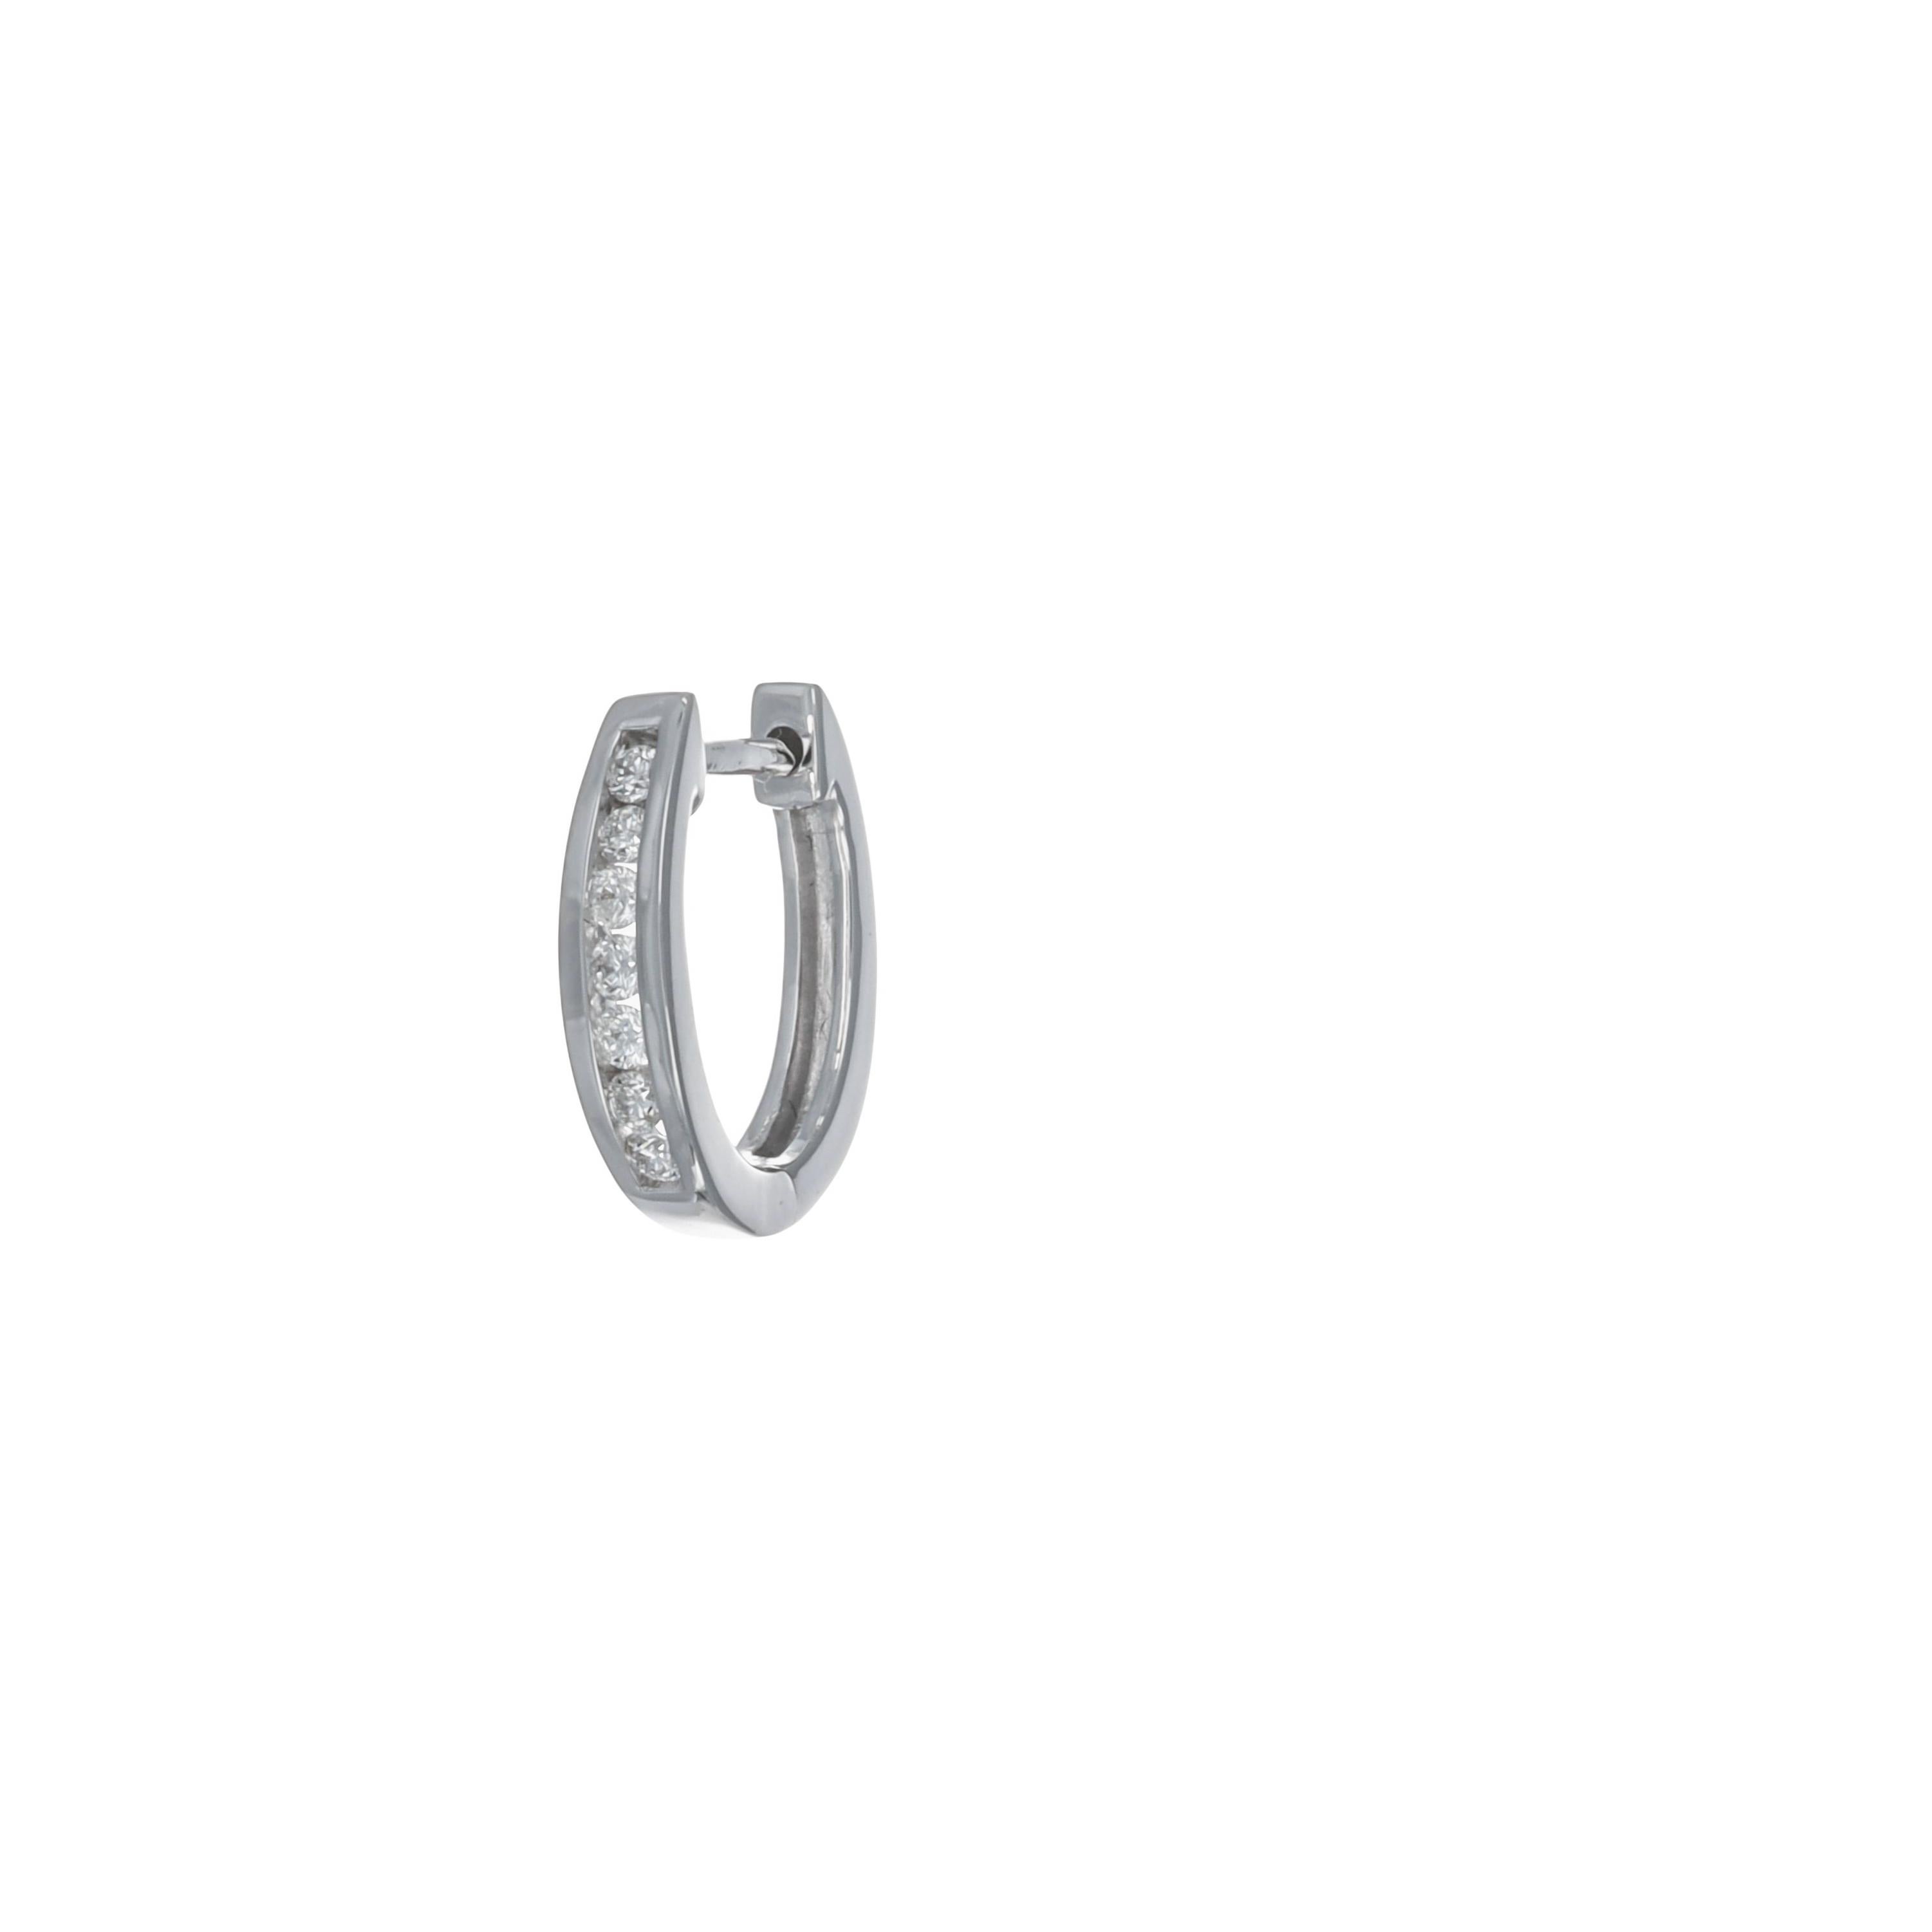 Round Cut Natural Diamond Earring 0.27 cts 18 KT White Gold Hoop Earring  For Sale